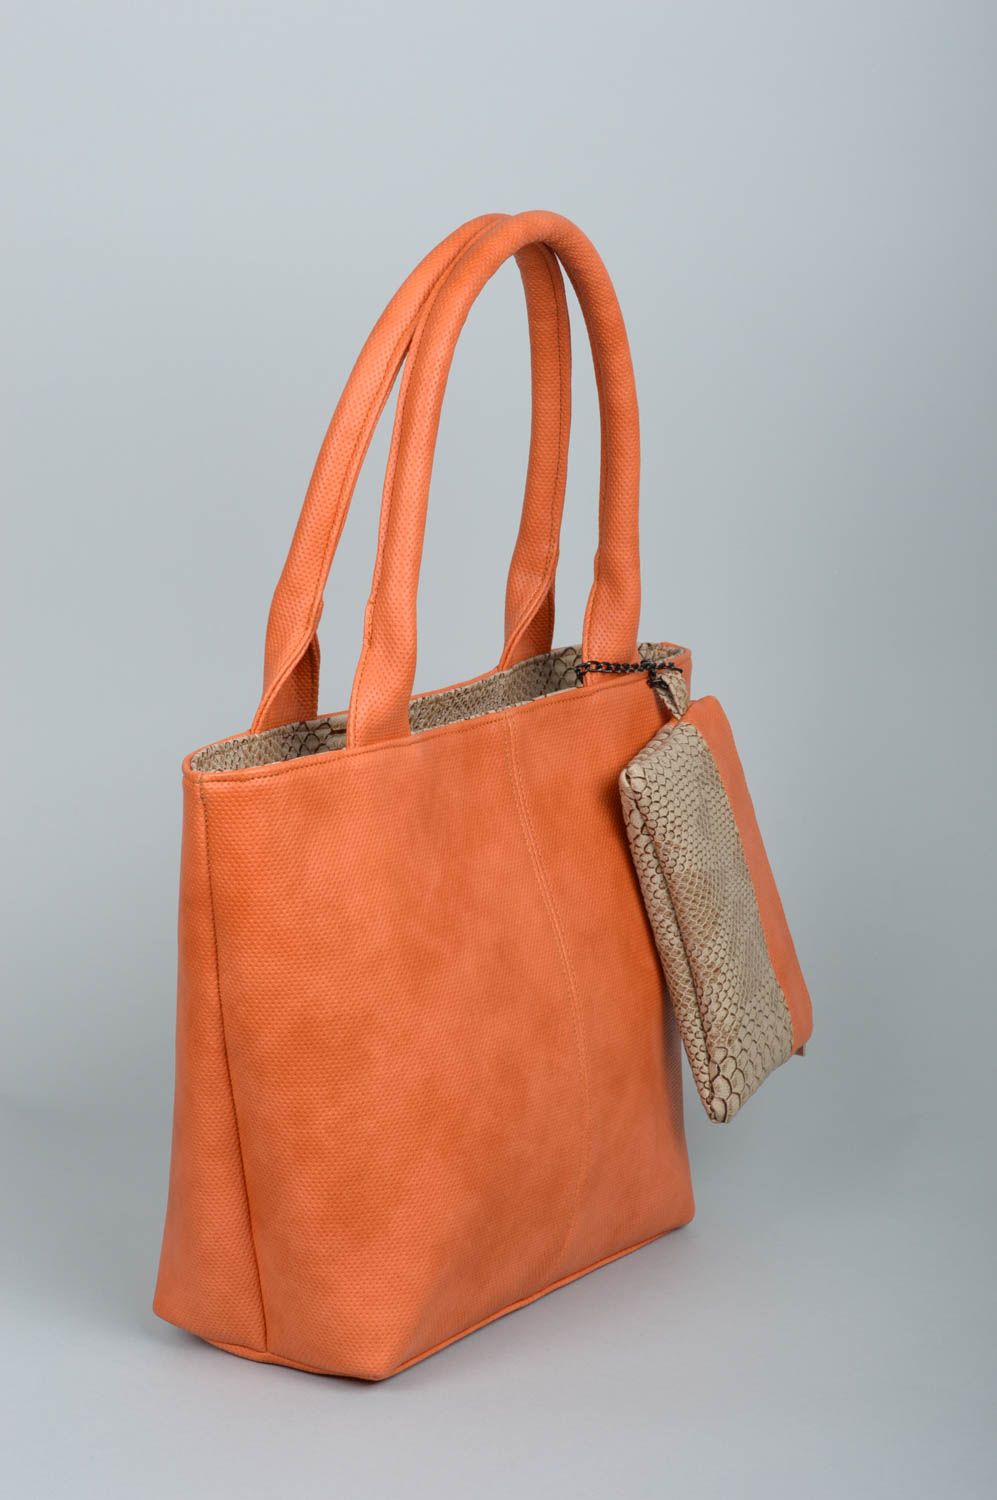 Shoulder bag handmade orange leather bag with purse casual style nice gift photo 2